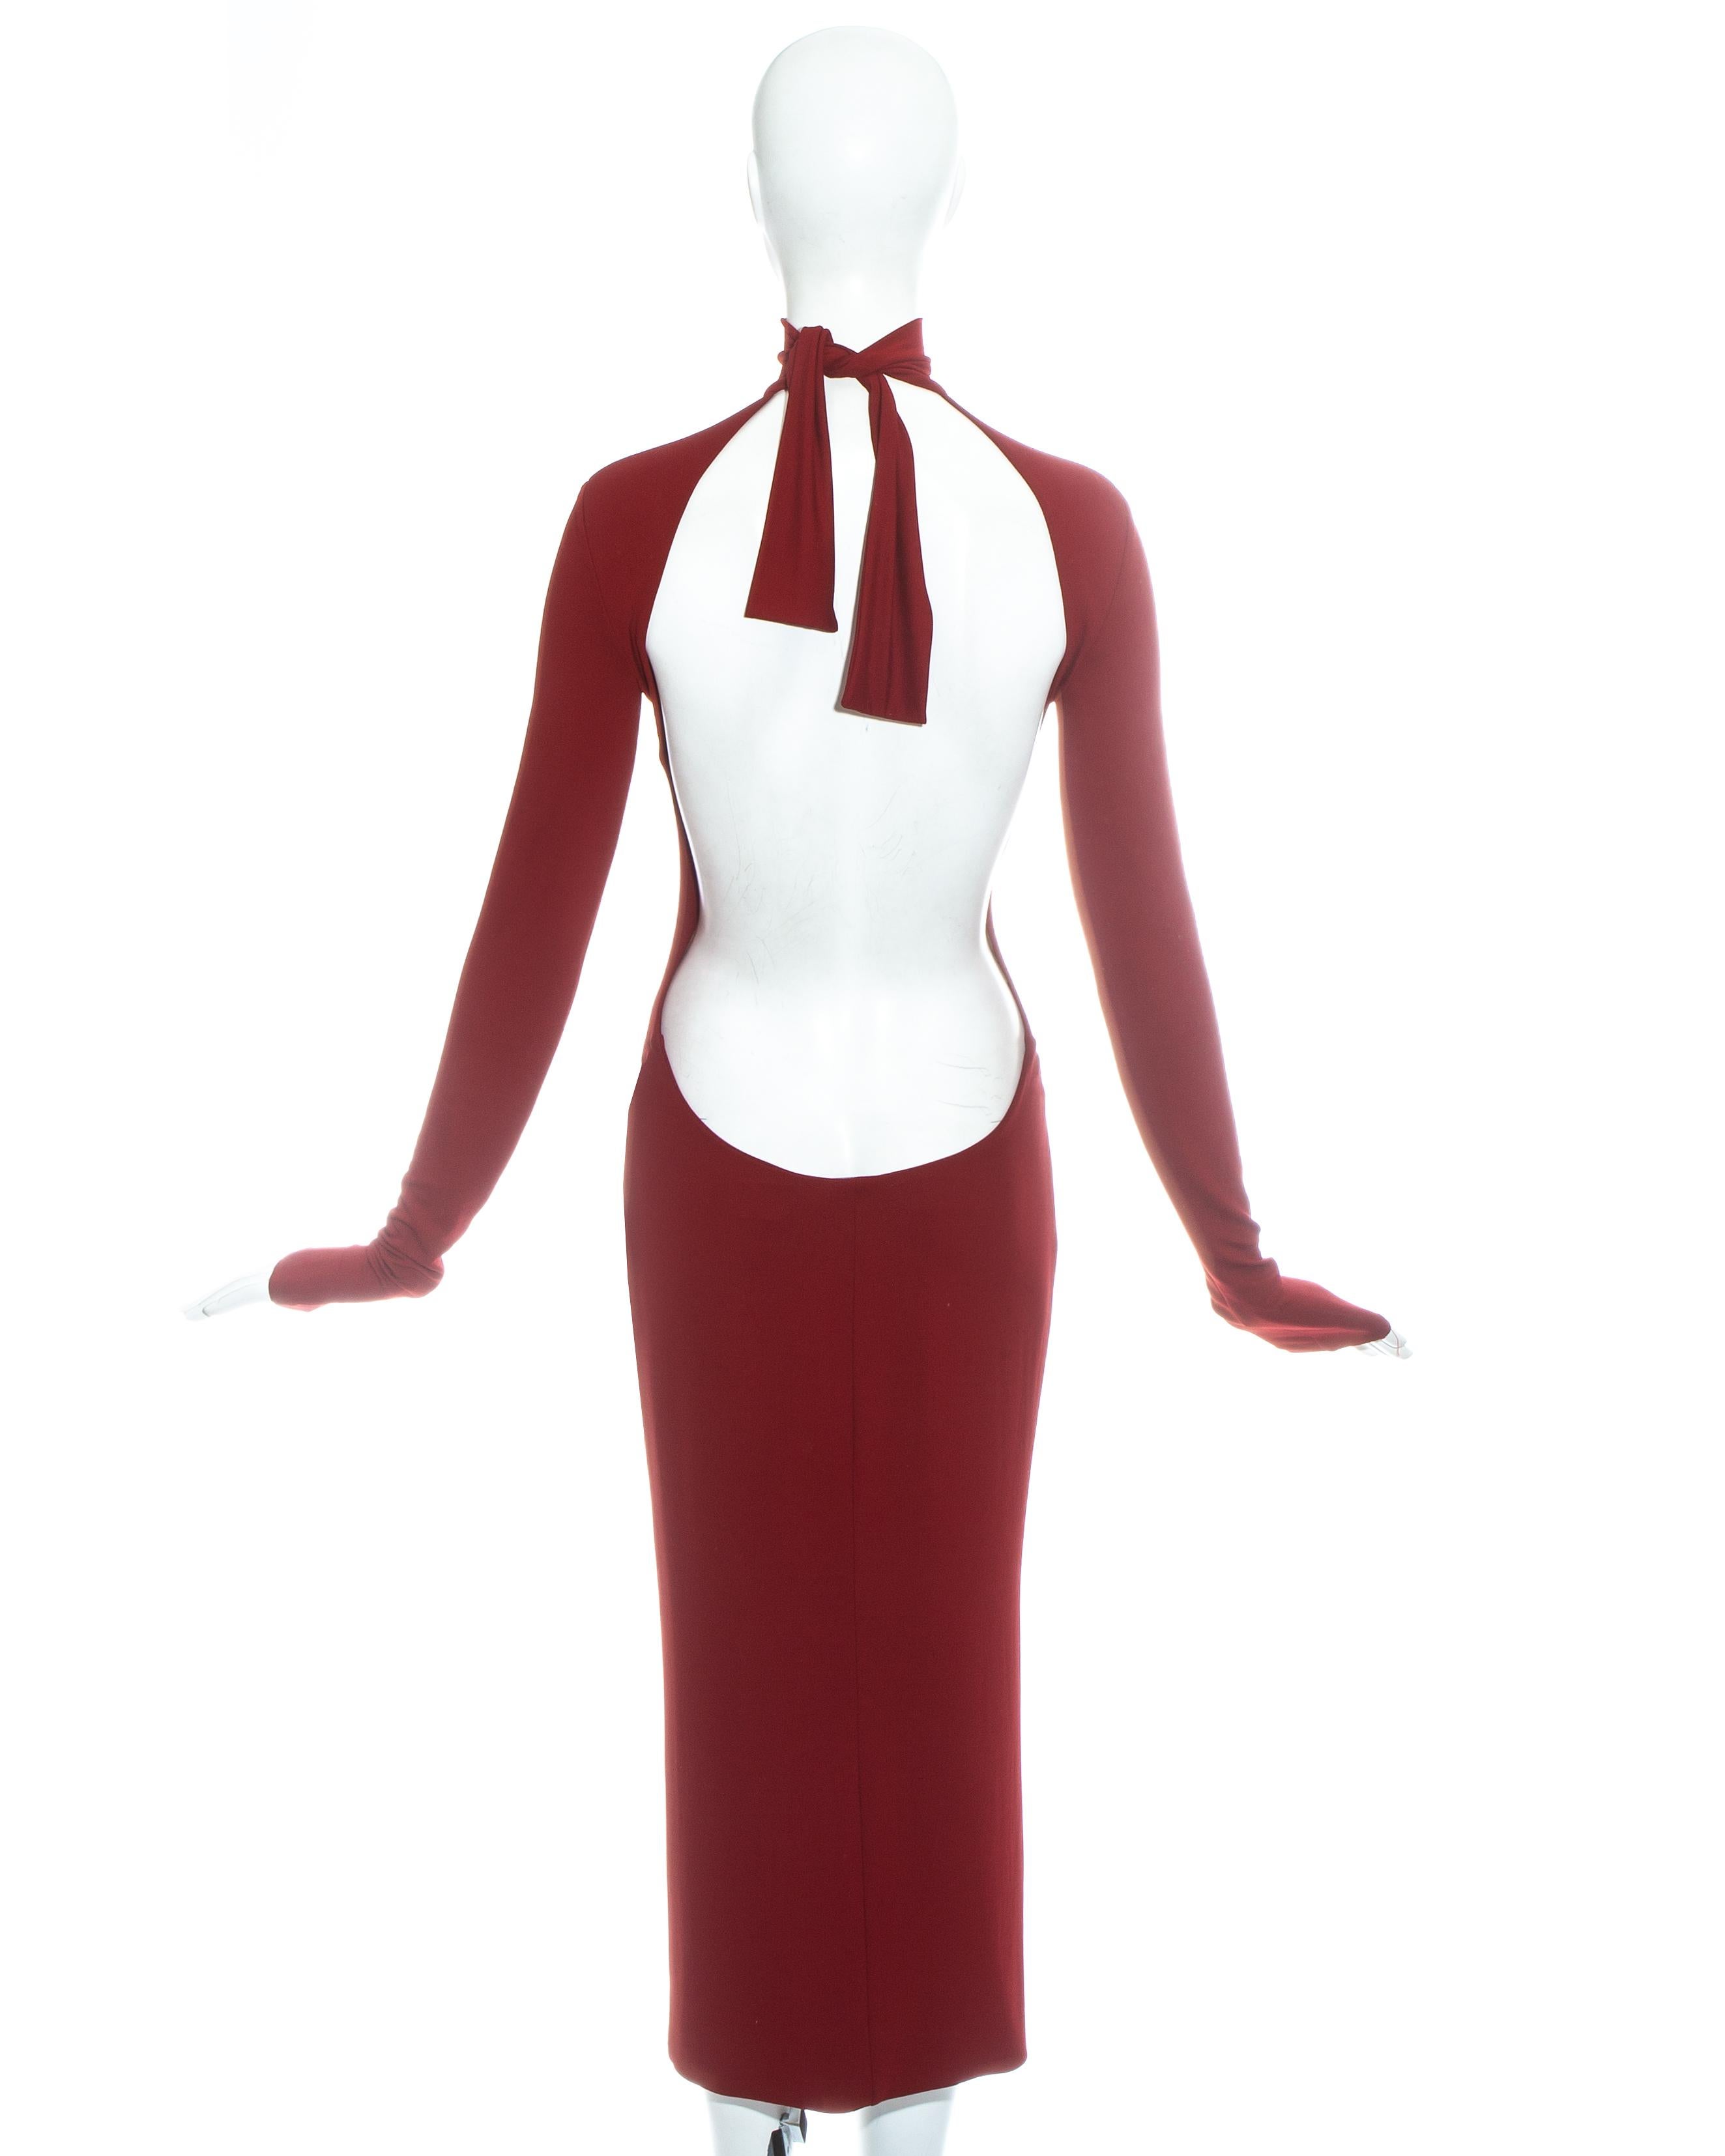 Dolce & Gabbana red figure hugging mid length turtle neck dress with very low back and tie up fastening around neck.

Spring-Summer 2001